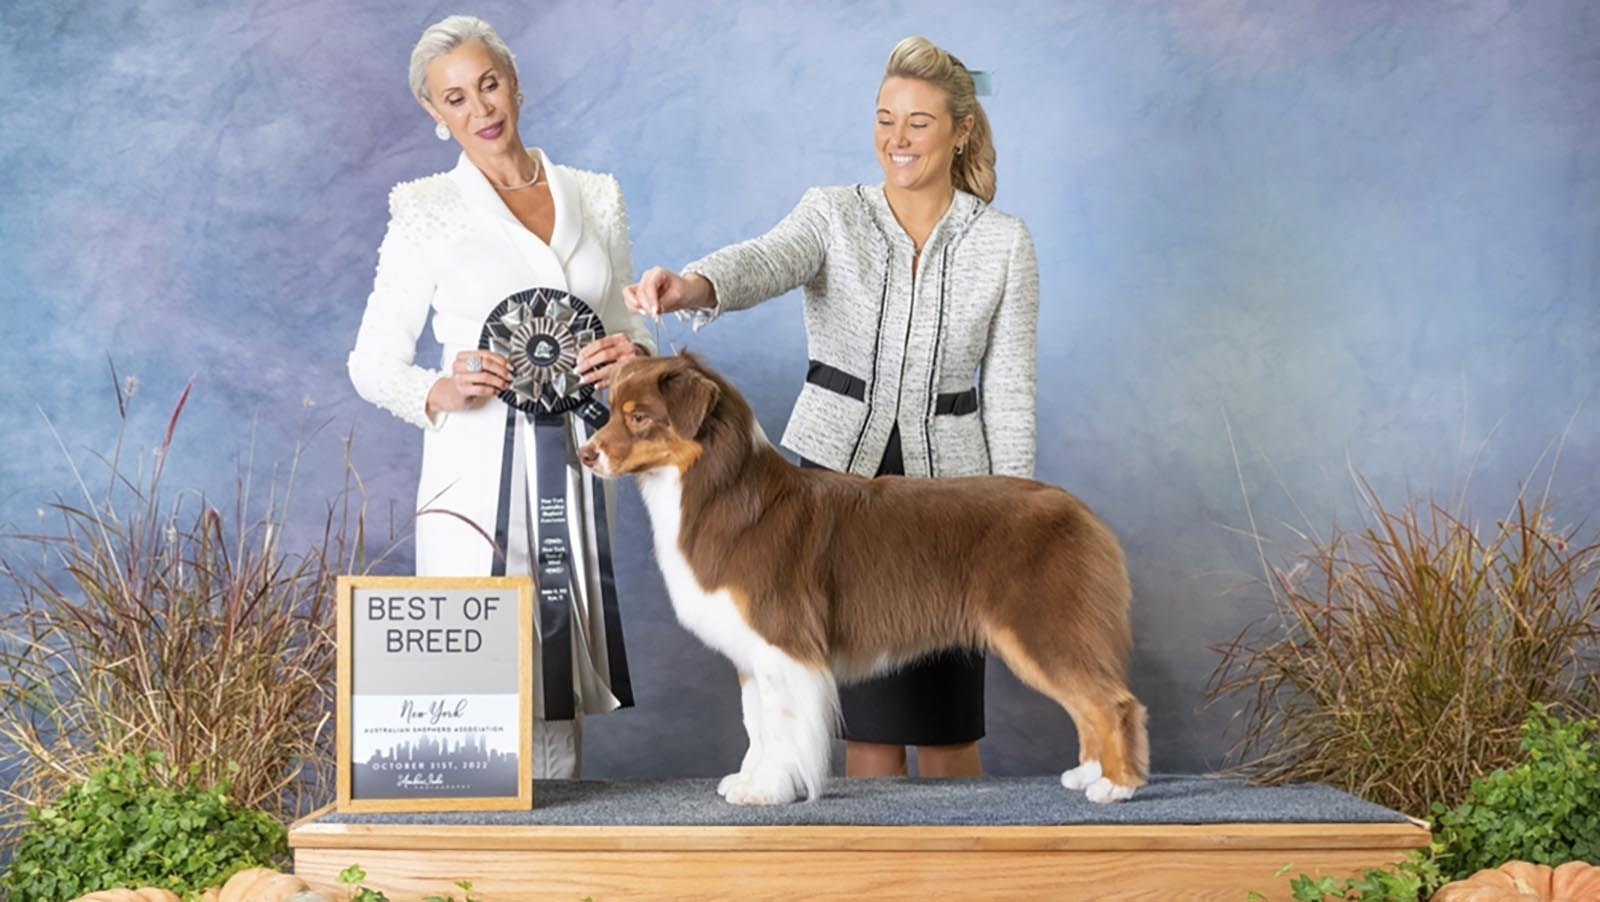 Sansa has several awards and ribbons, including this Best of Breed recognition from the New York Australian Shepherd Association.